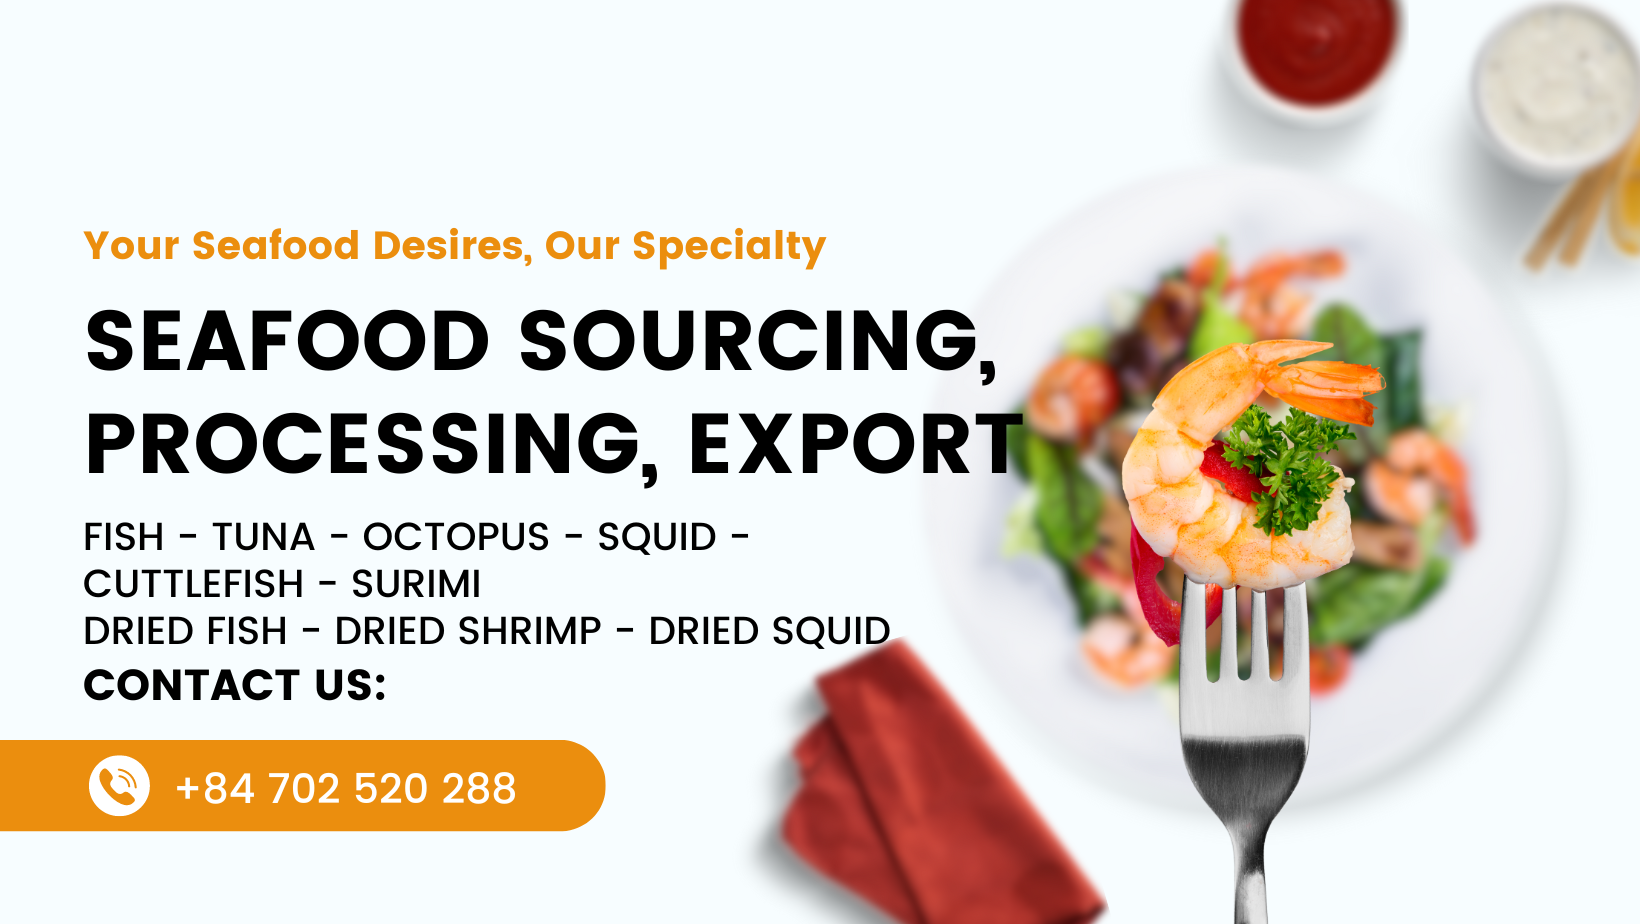 SEAFOOD SOURCING, PROCESSING, EXPORT (1)